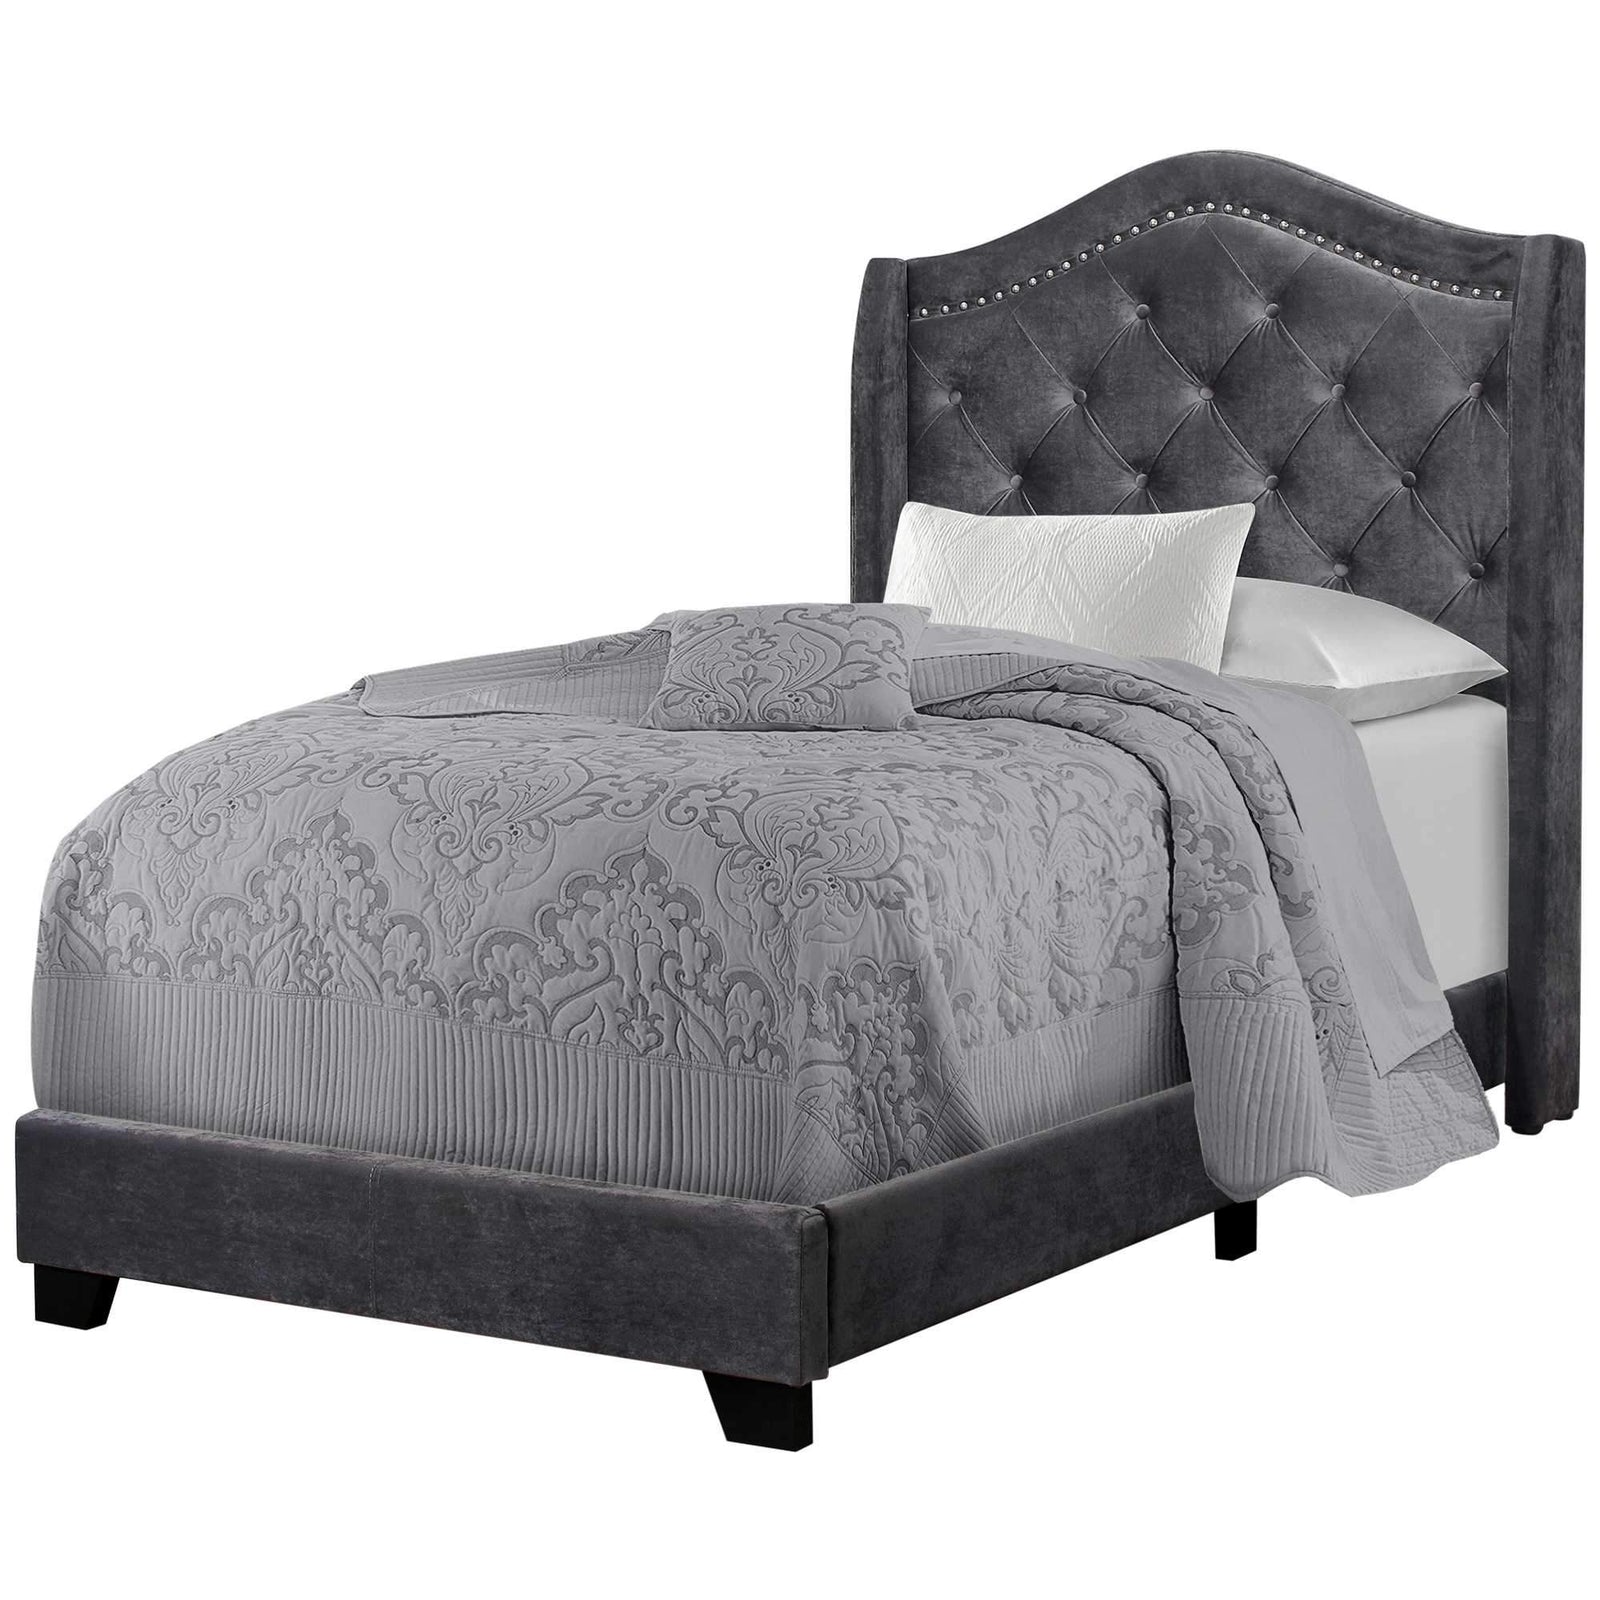 Grey Foam Solid Wood Velvet Twin Size Bed With A Chrome Trim